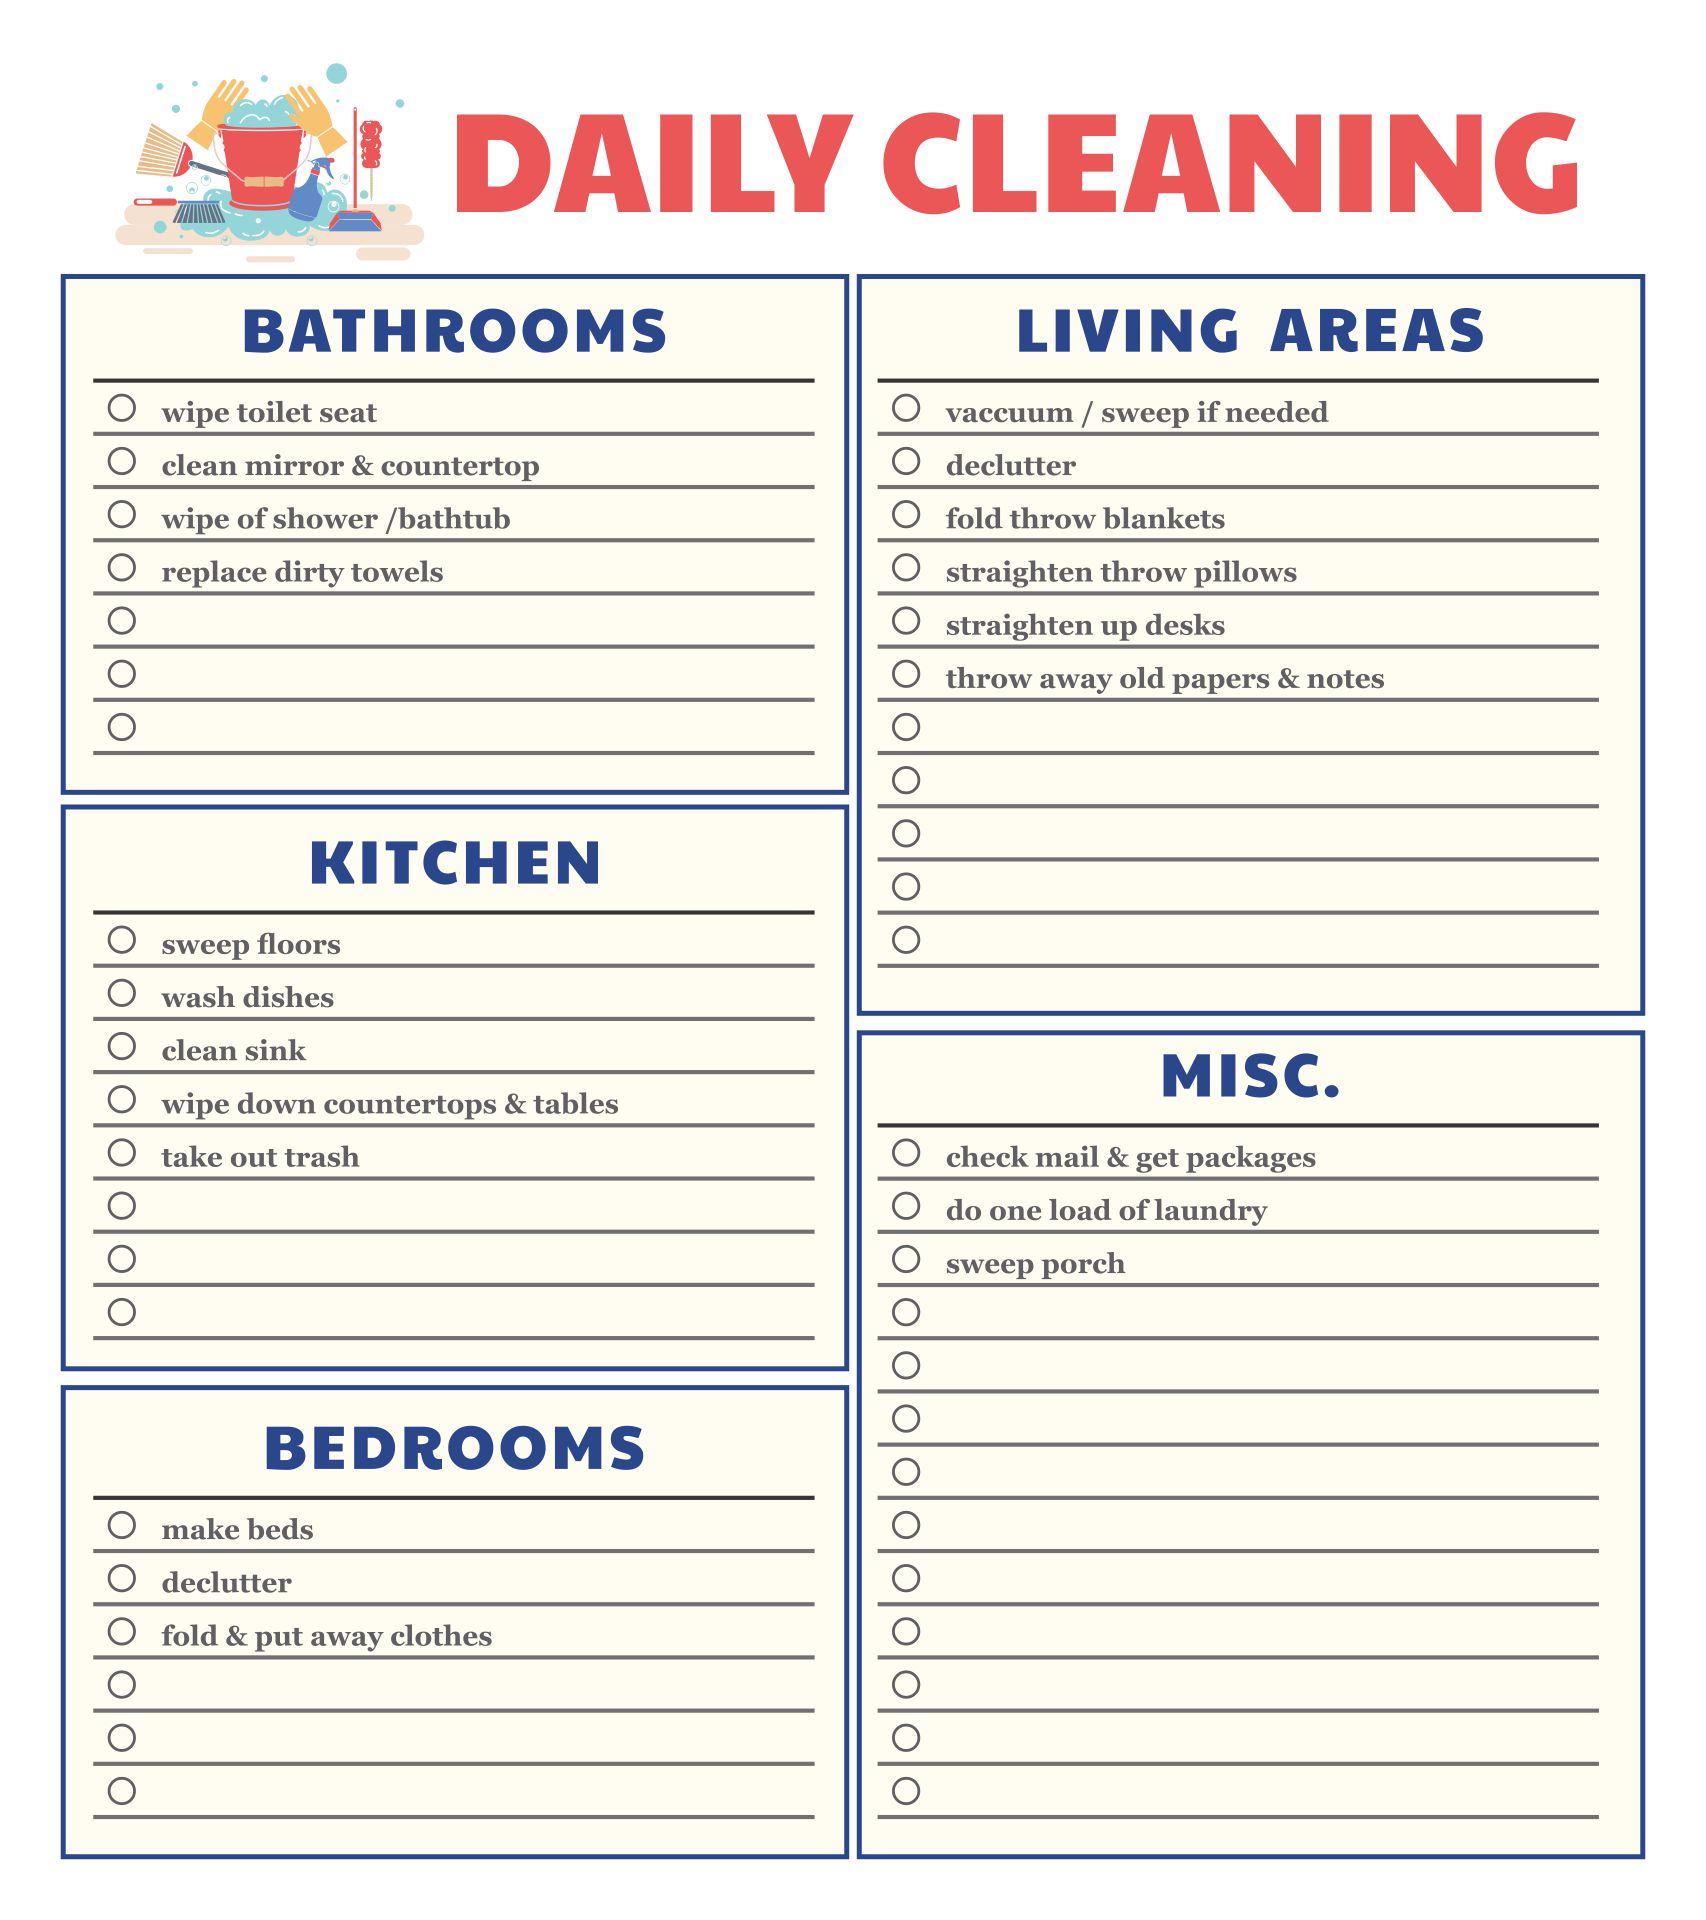 8-best-images-of-printable-house-cleaning-charts-daily-house-cleaning-schedule-template-daily